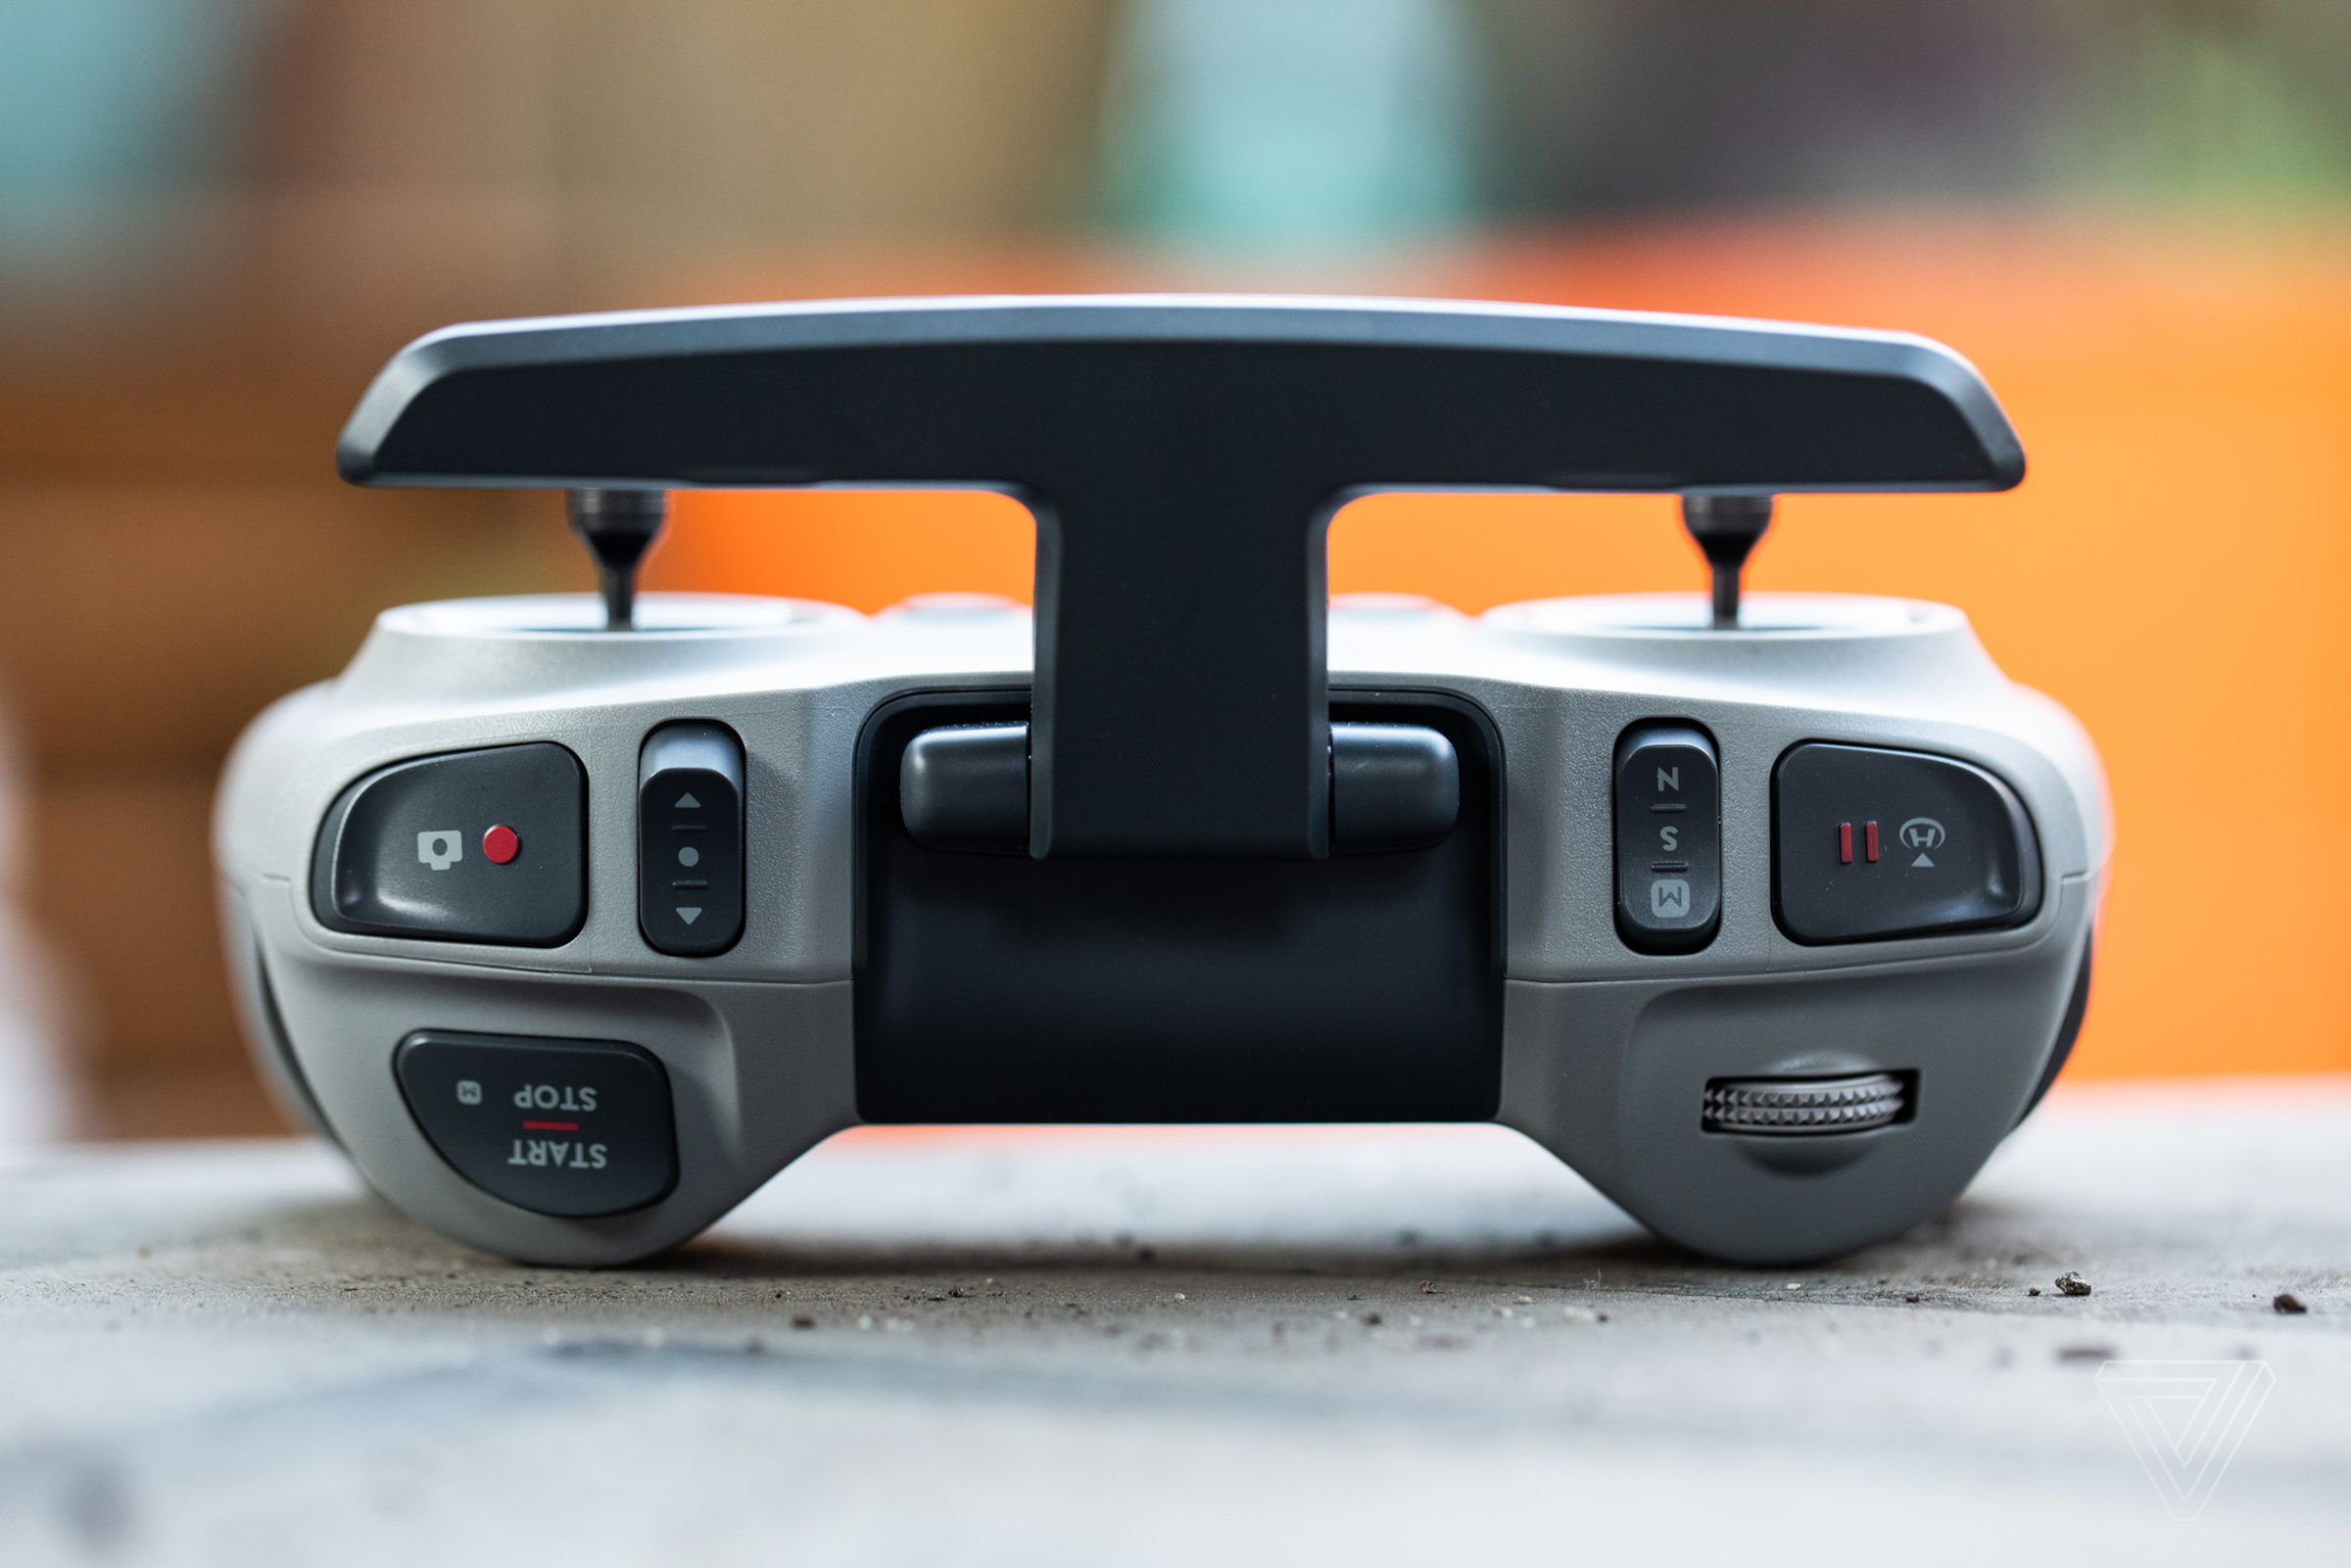 The FPV’s standard controller is compact and similar to DJI’s other drone controllers.